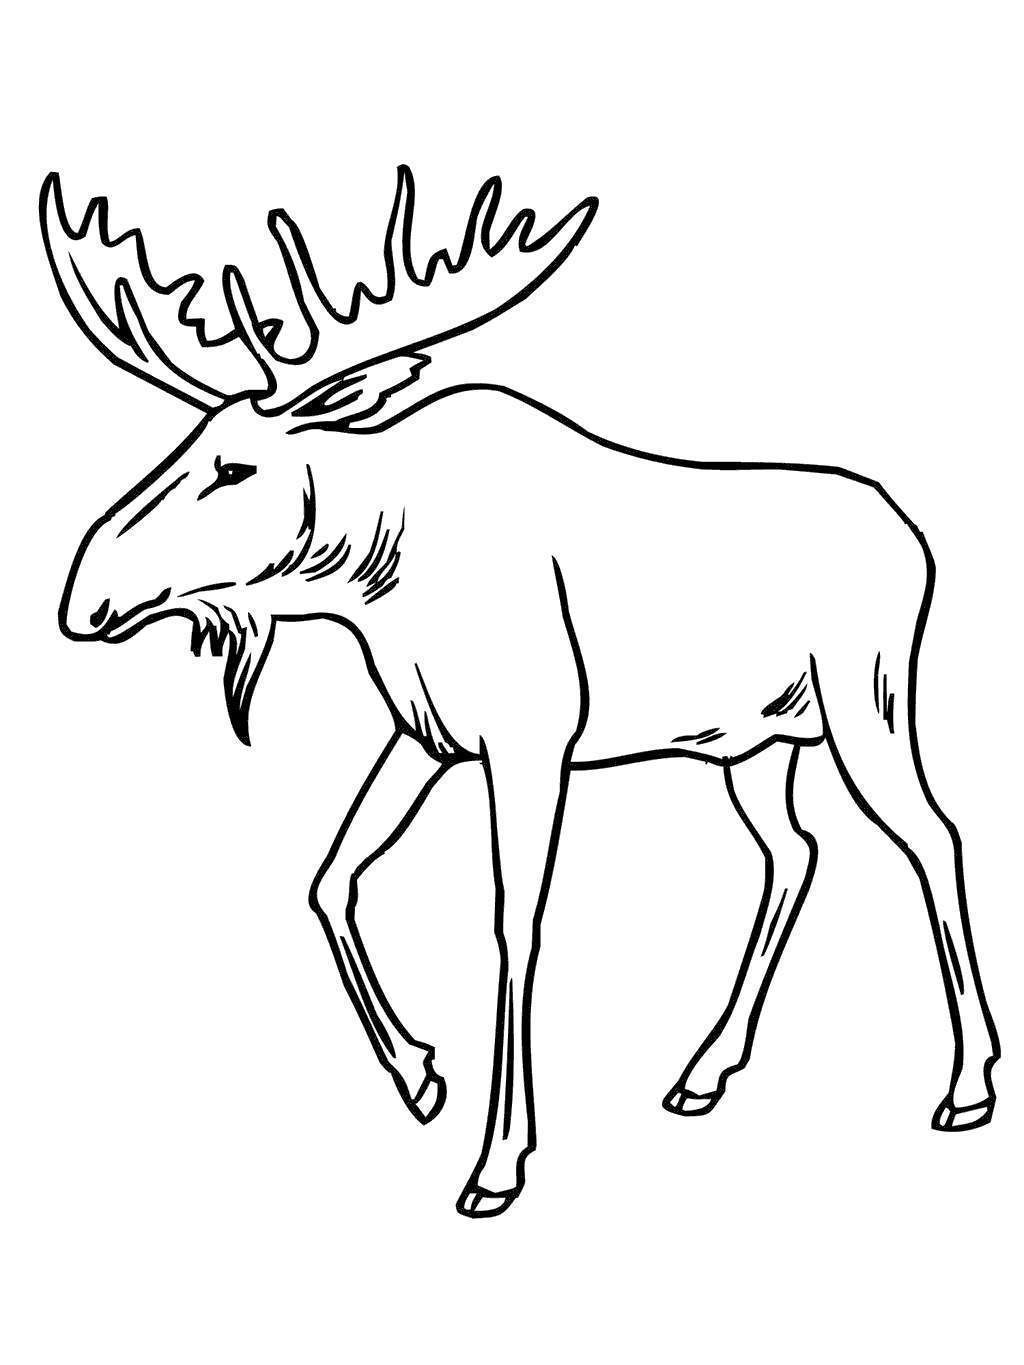 Free Moose Coloring Pages Coloring Sheets printable